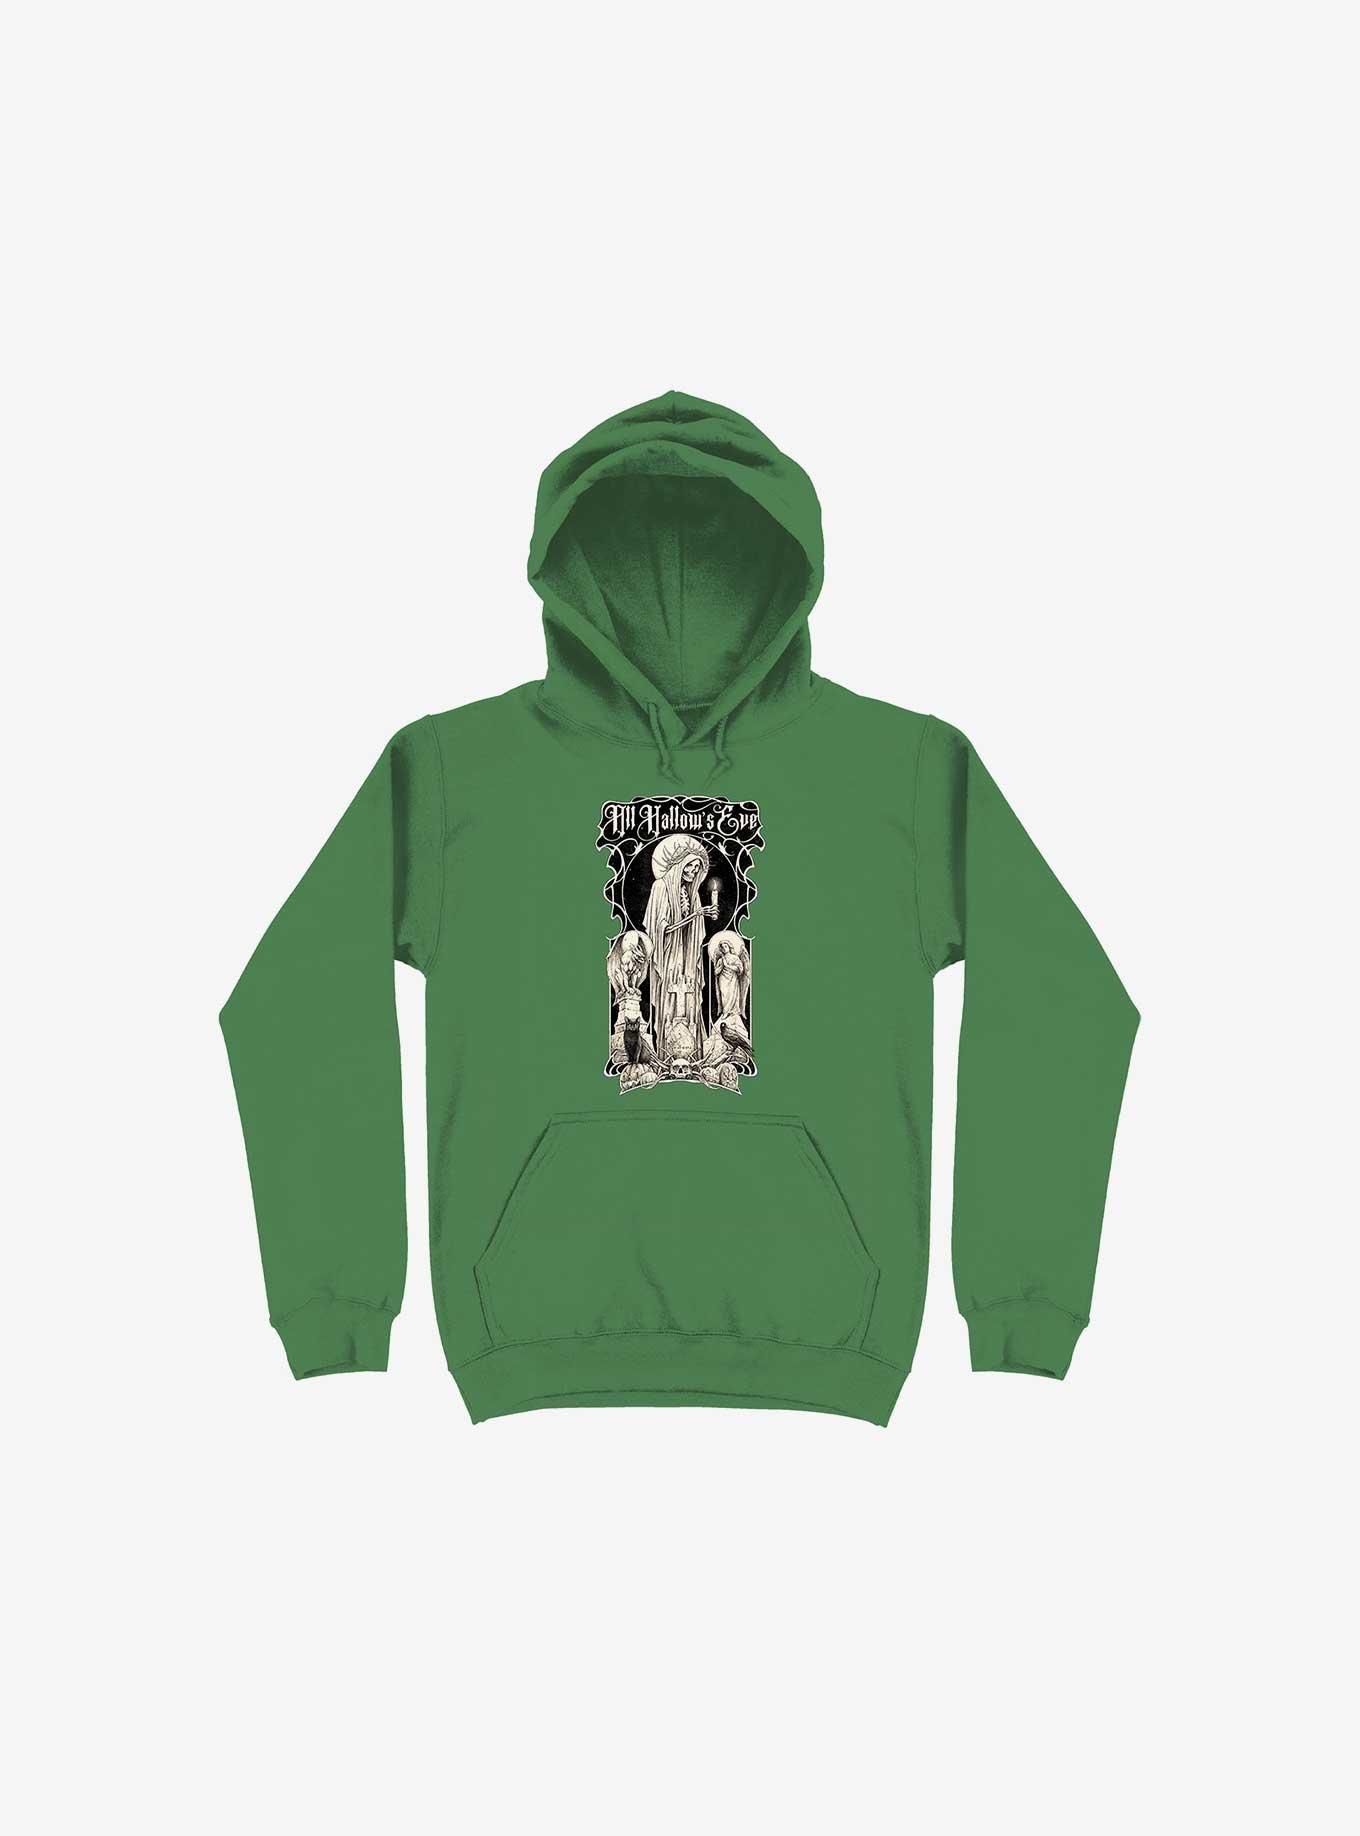 All Hallow's Eve Kelly Green Hoodie, KELLY GREEN, hi-res